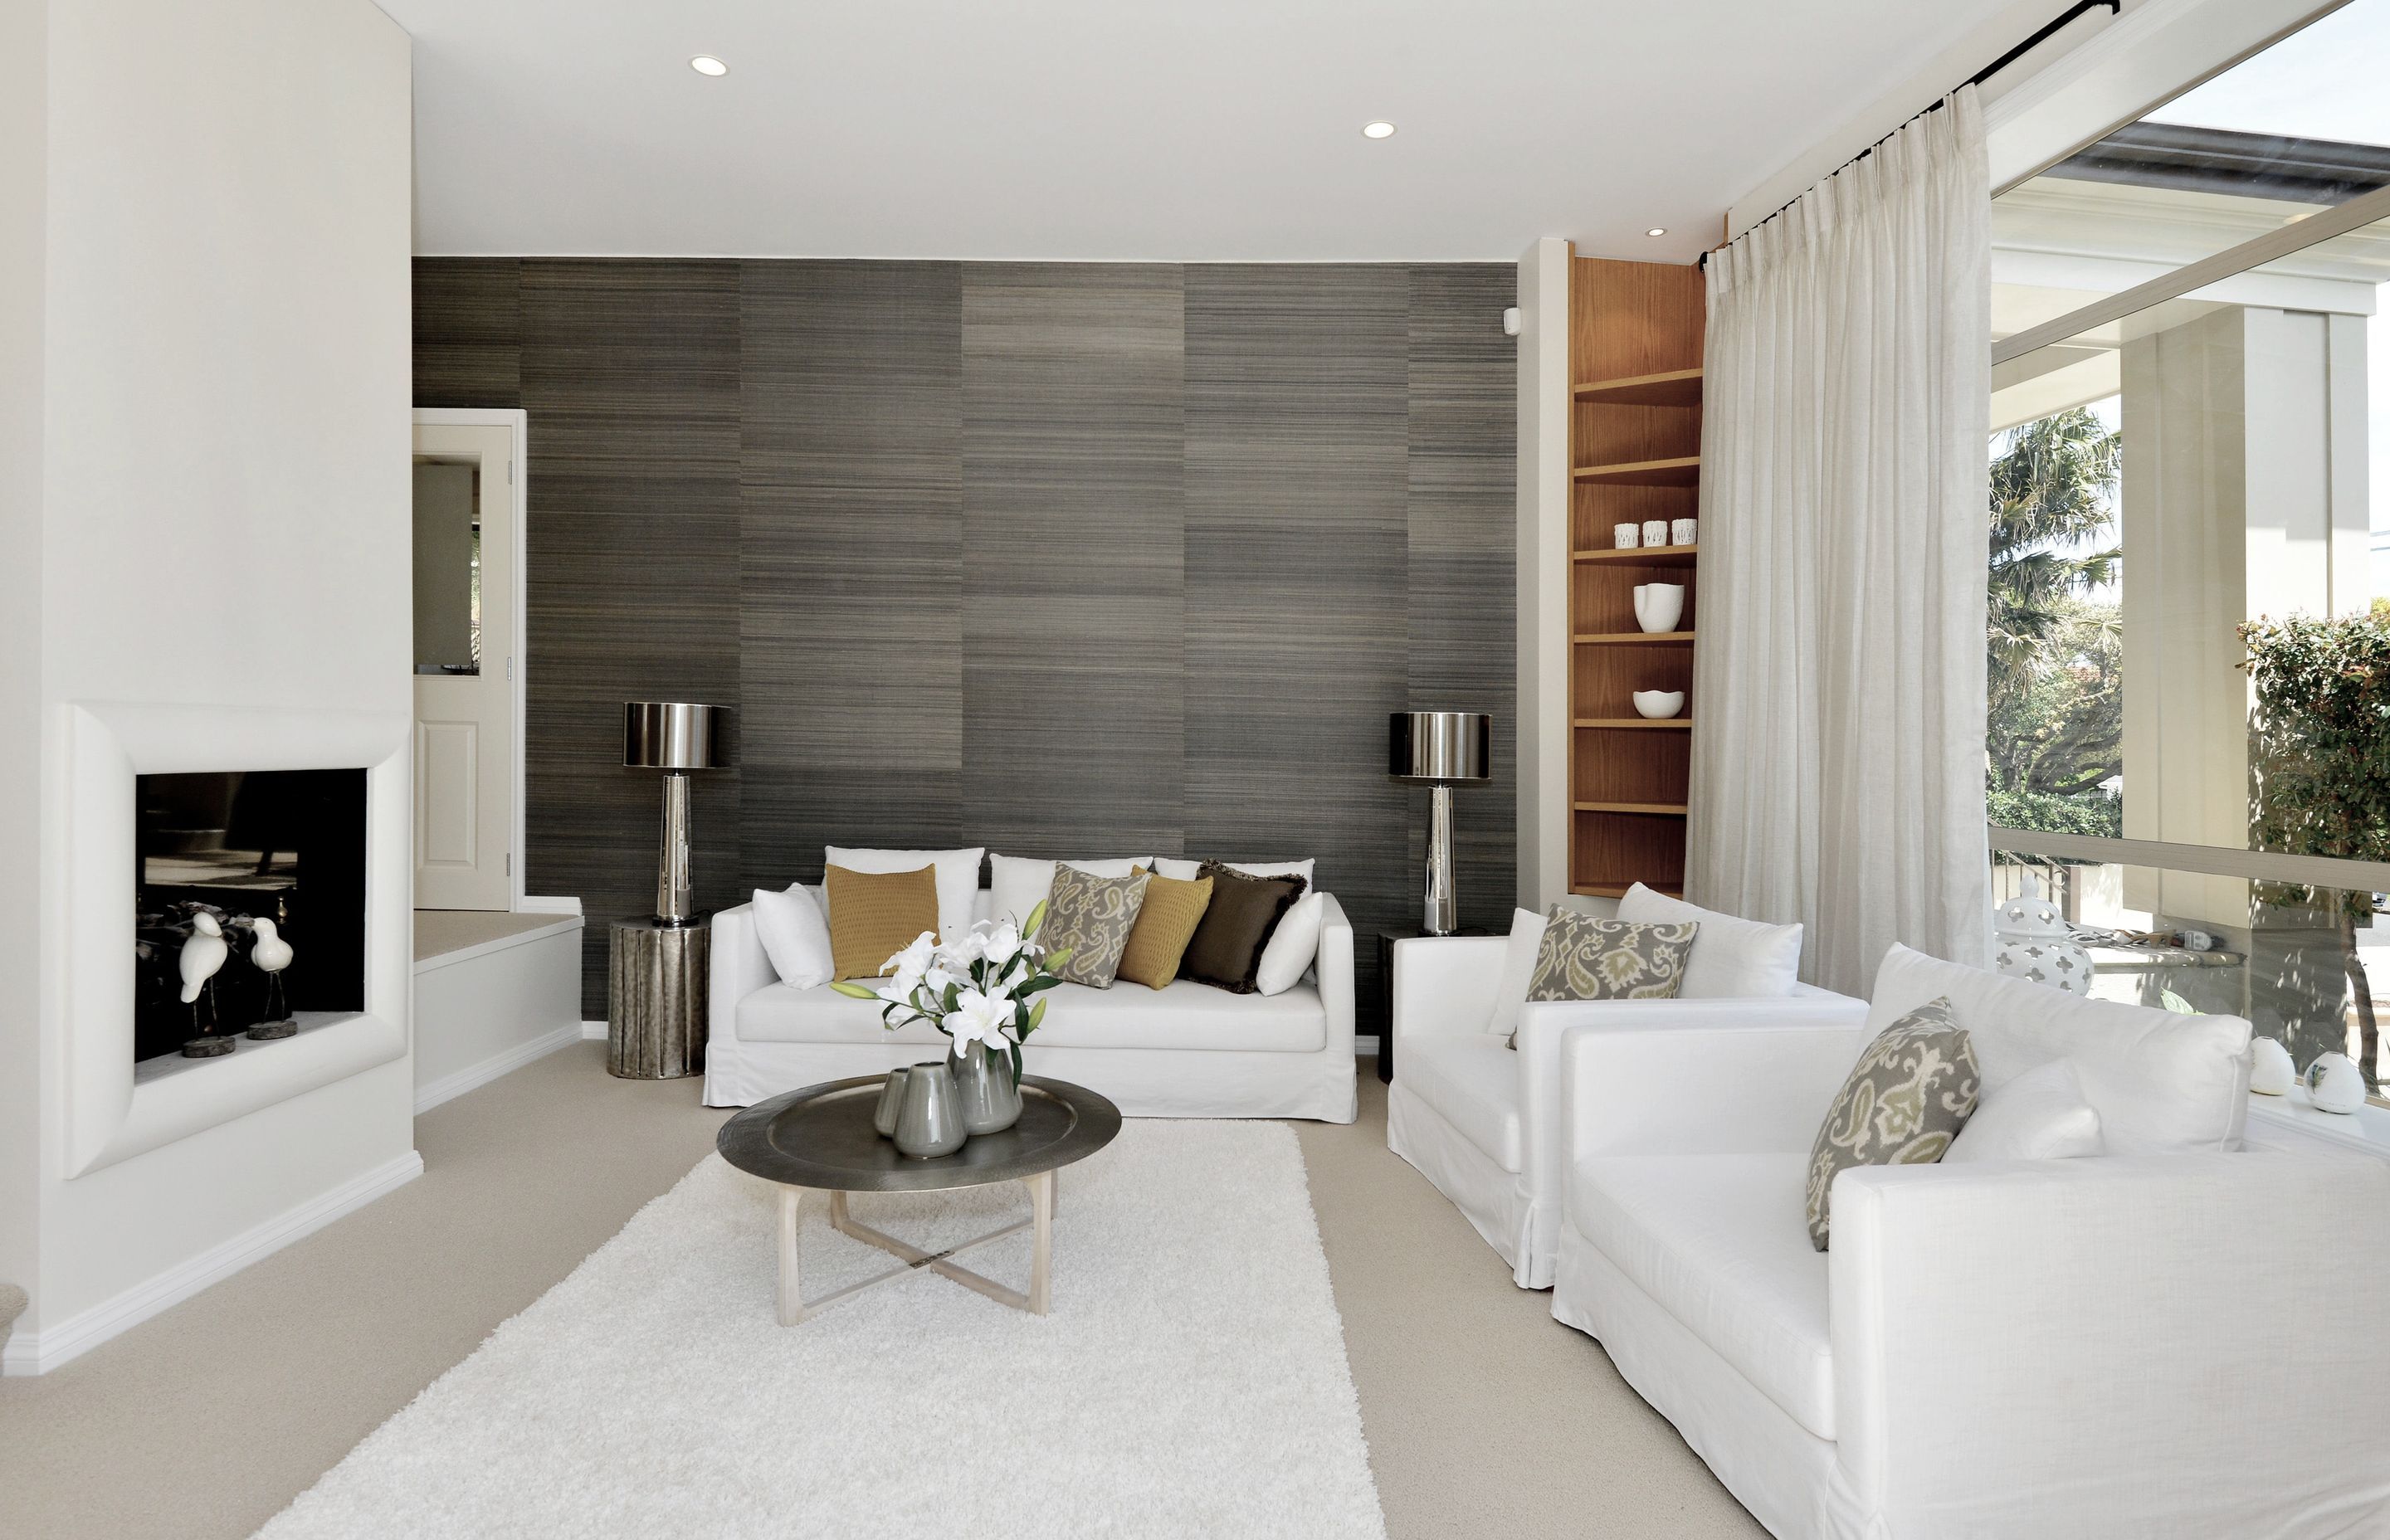 A beautiful structural grasscloth wallpaper sets the theme for an elegant and restful result. You won't want to leave!